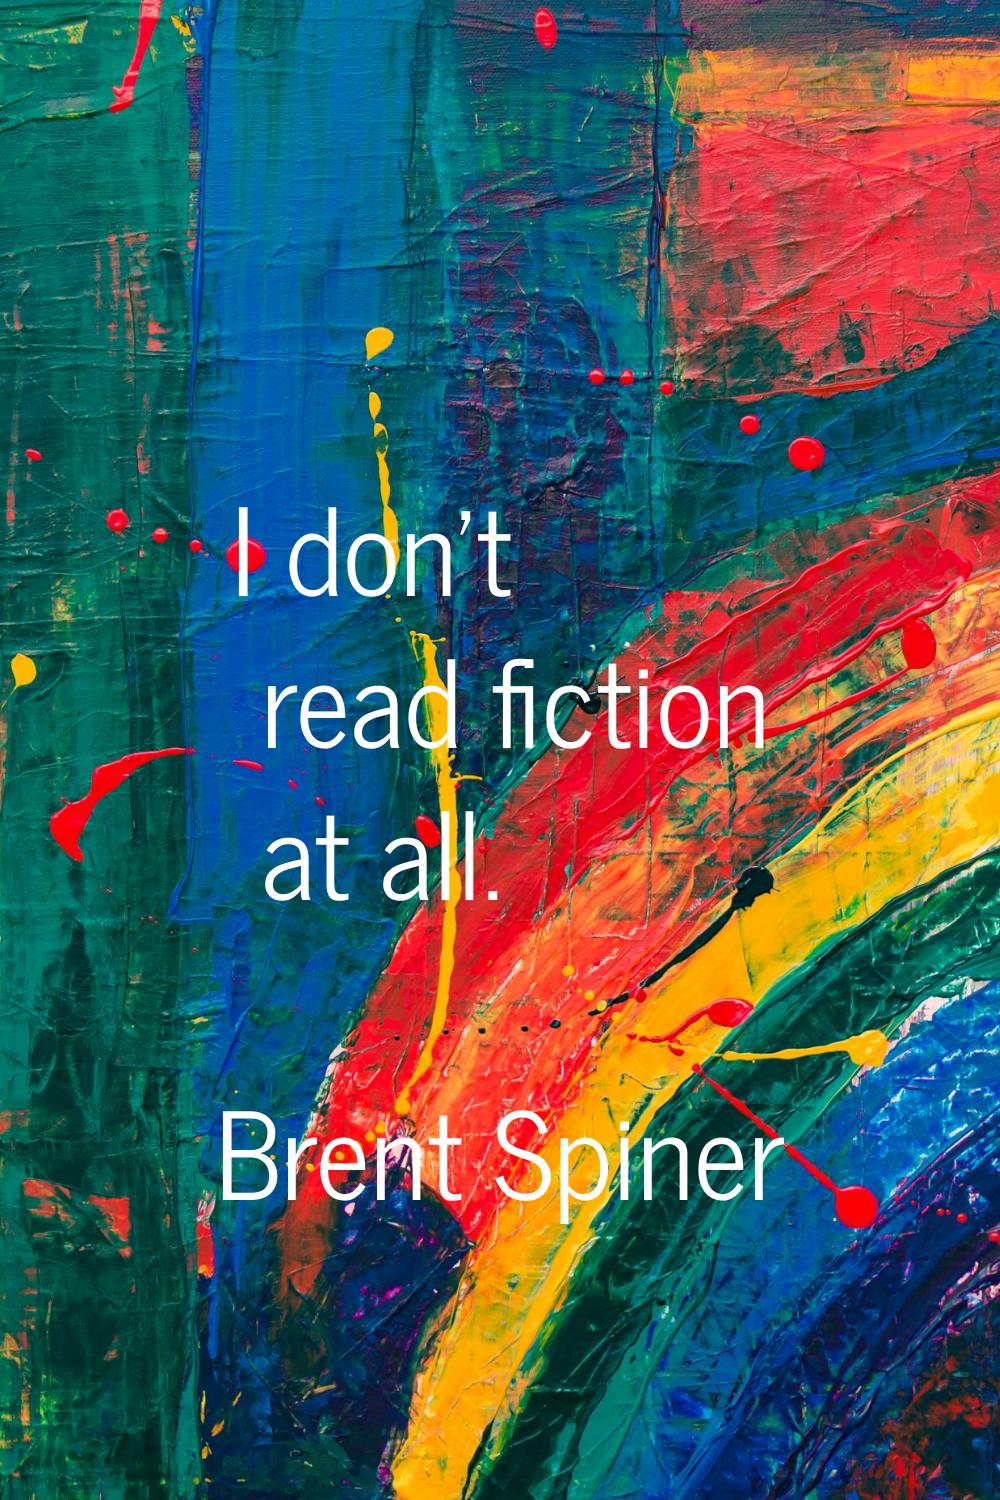 I don't read fiction at all.